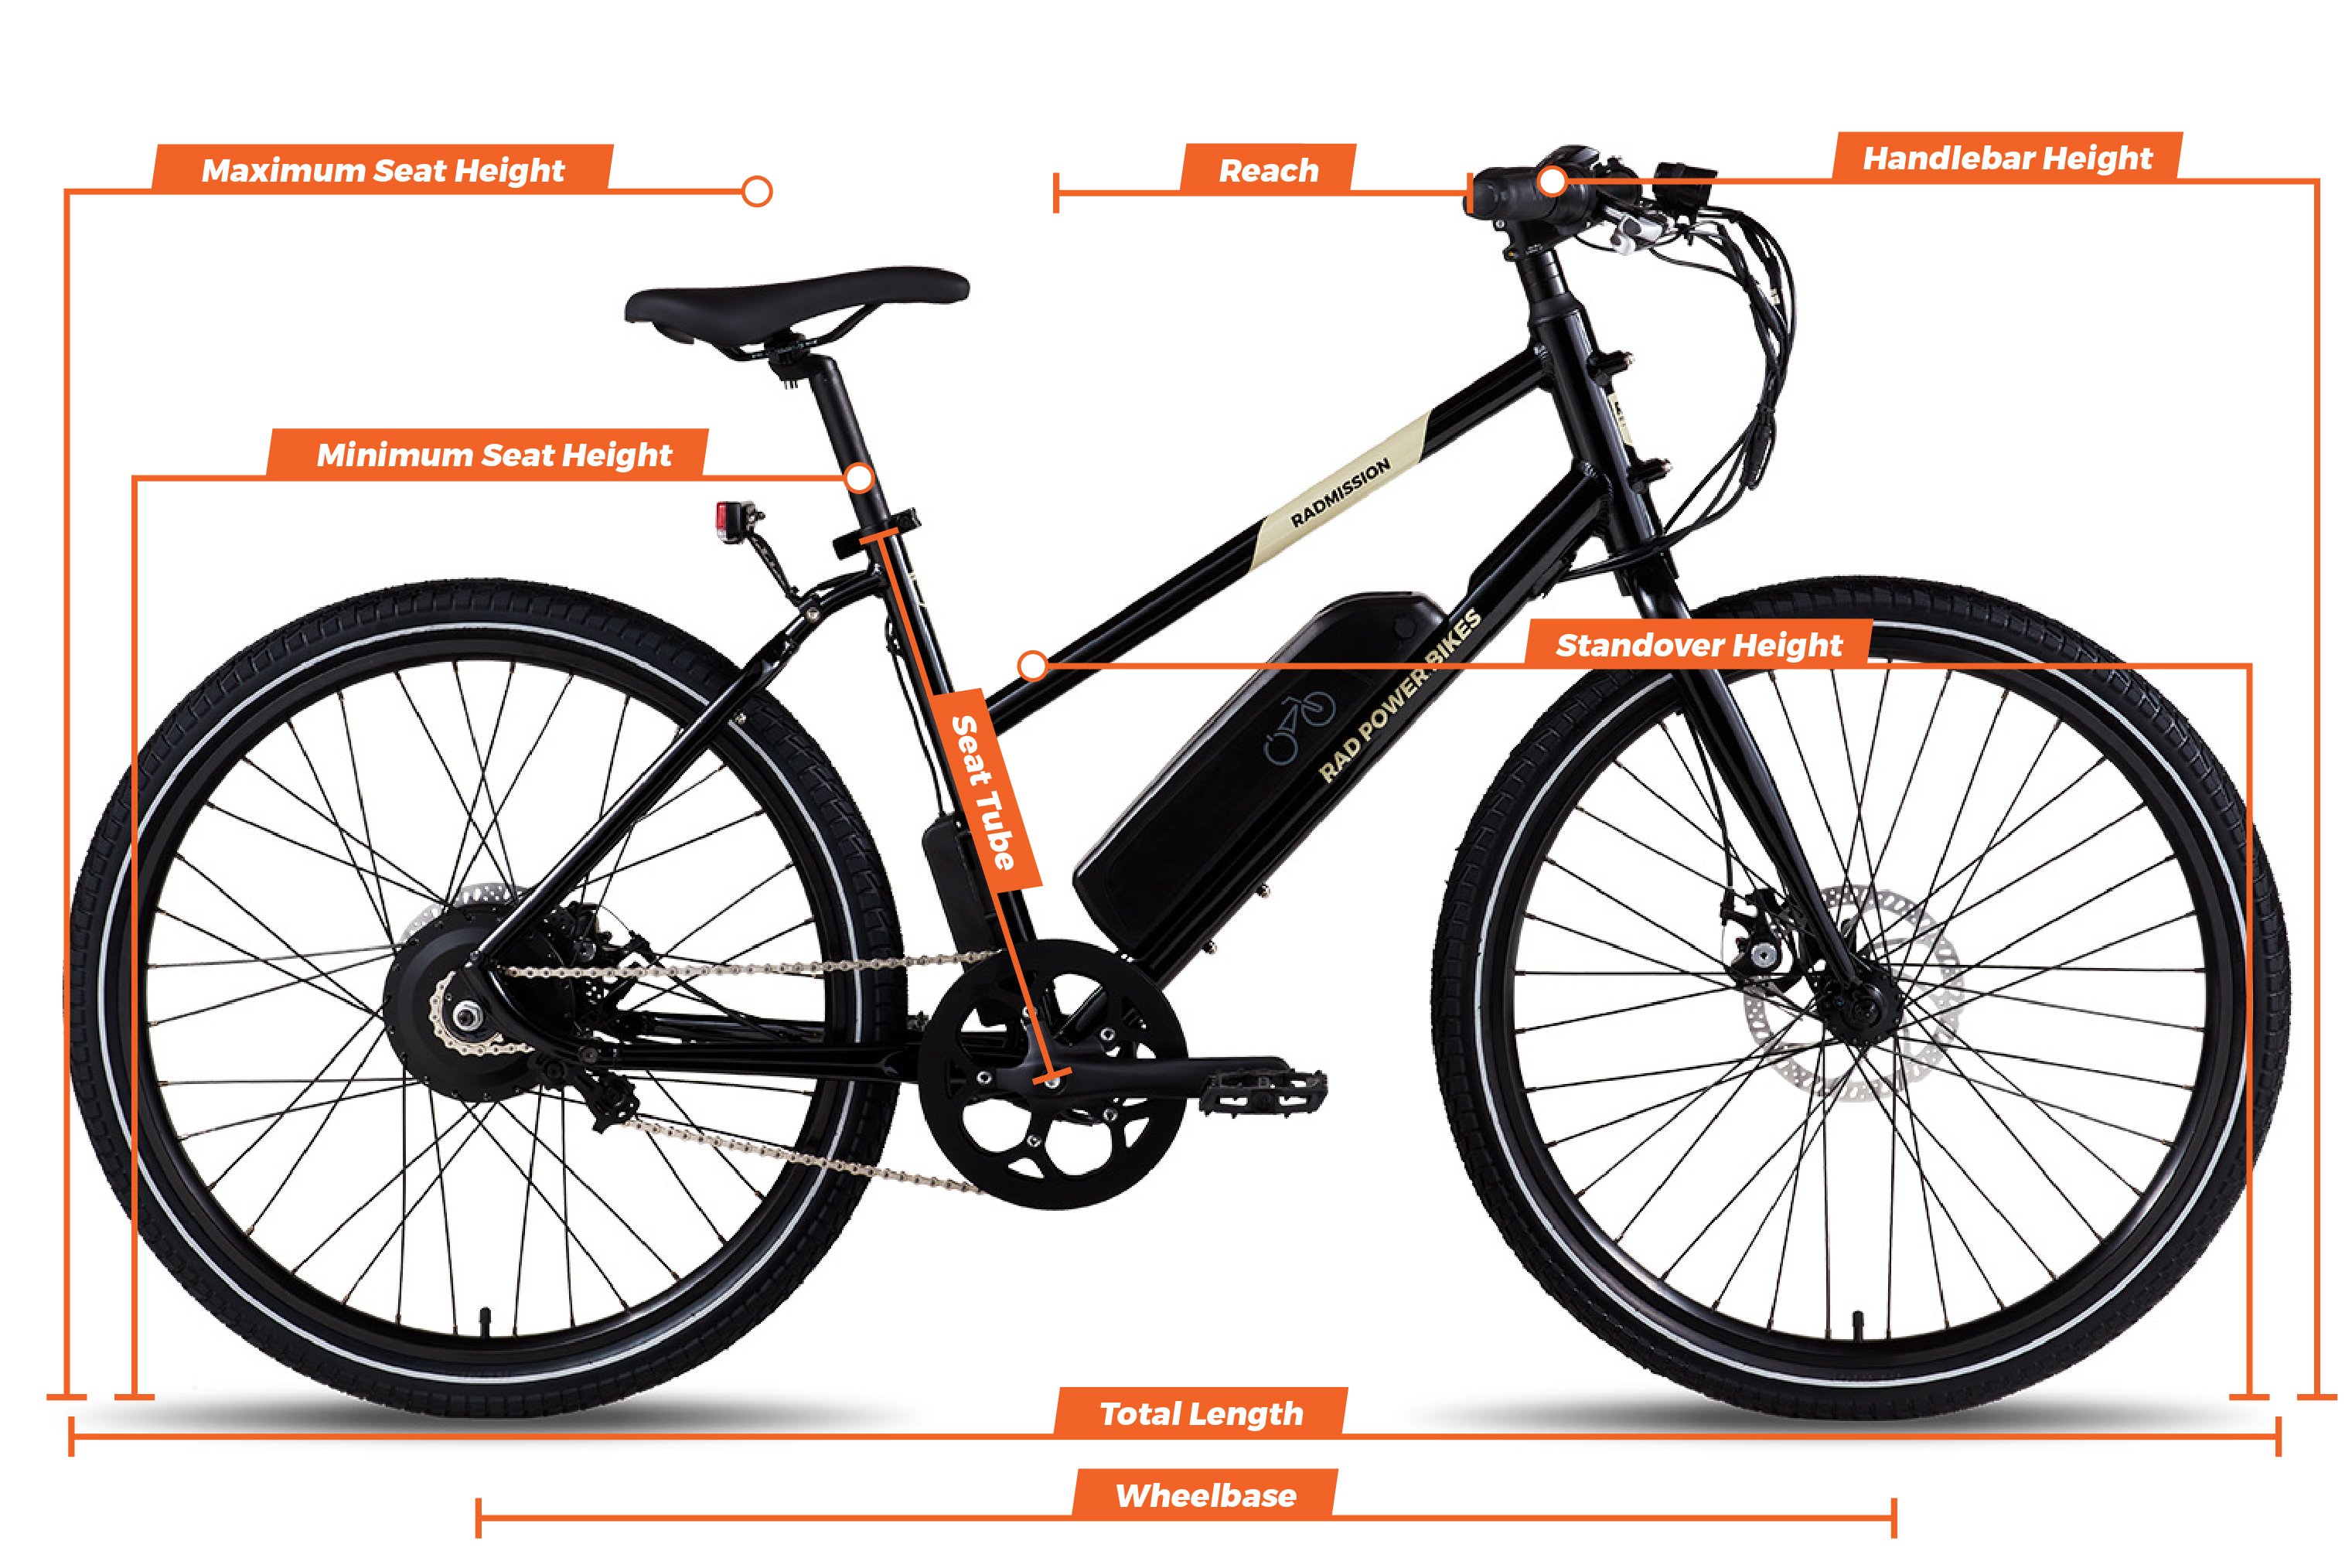 Geometry chart for the RadMission Electric Metro Bike